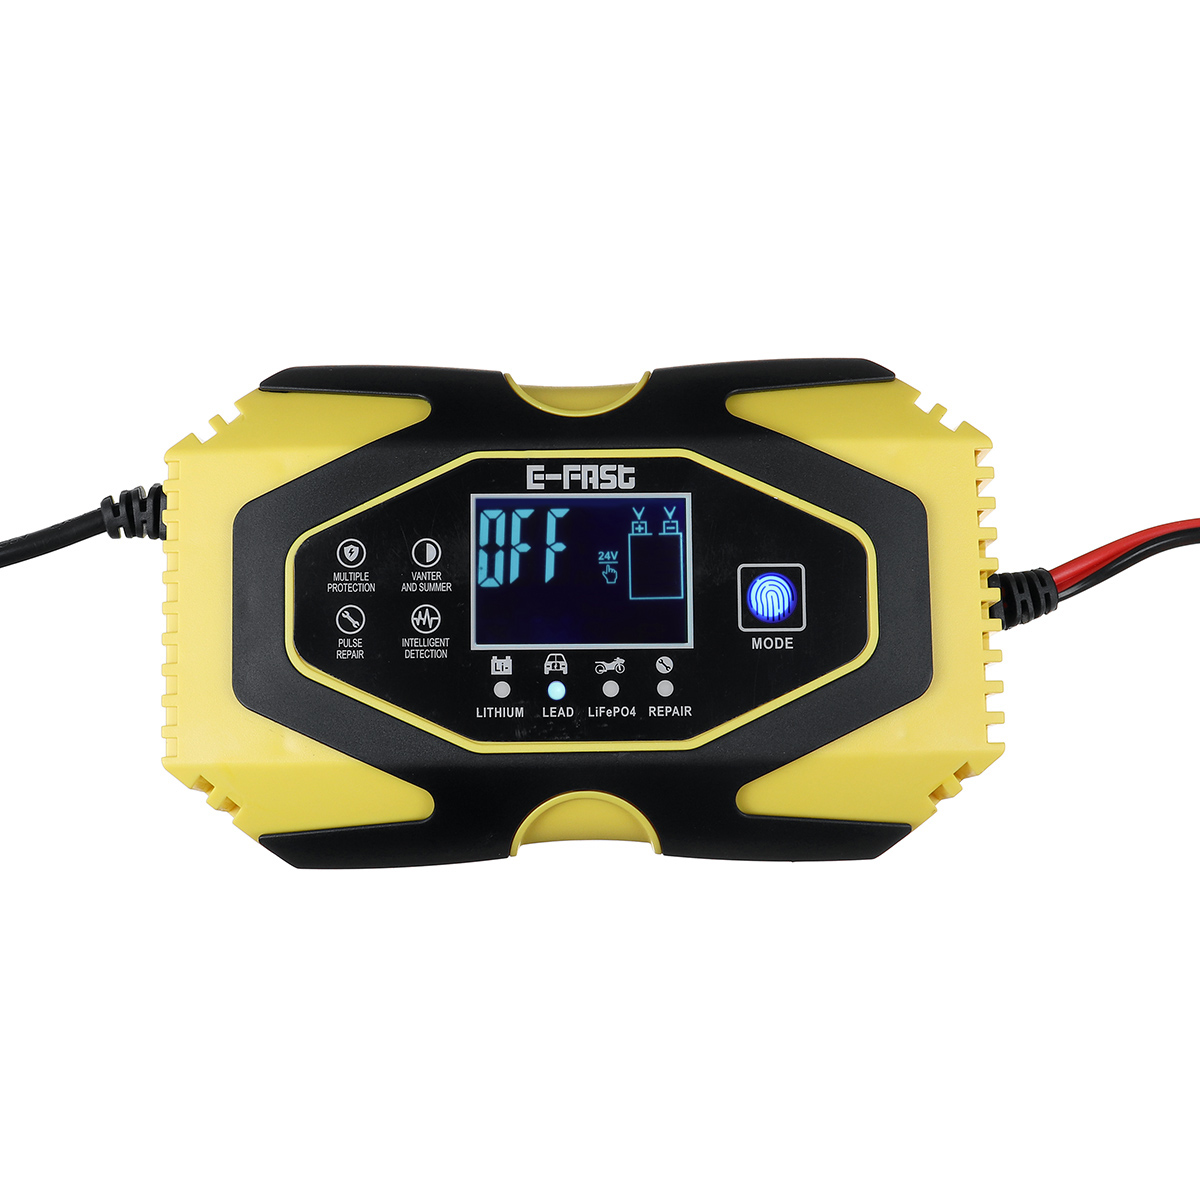 110-220V-Car-Battery-Charger-Maintainer-Auto-For-126V-Lithium-Lead-acid-LiFePO4battery-1715026-6